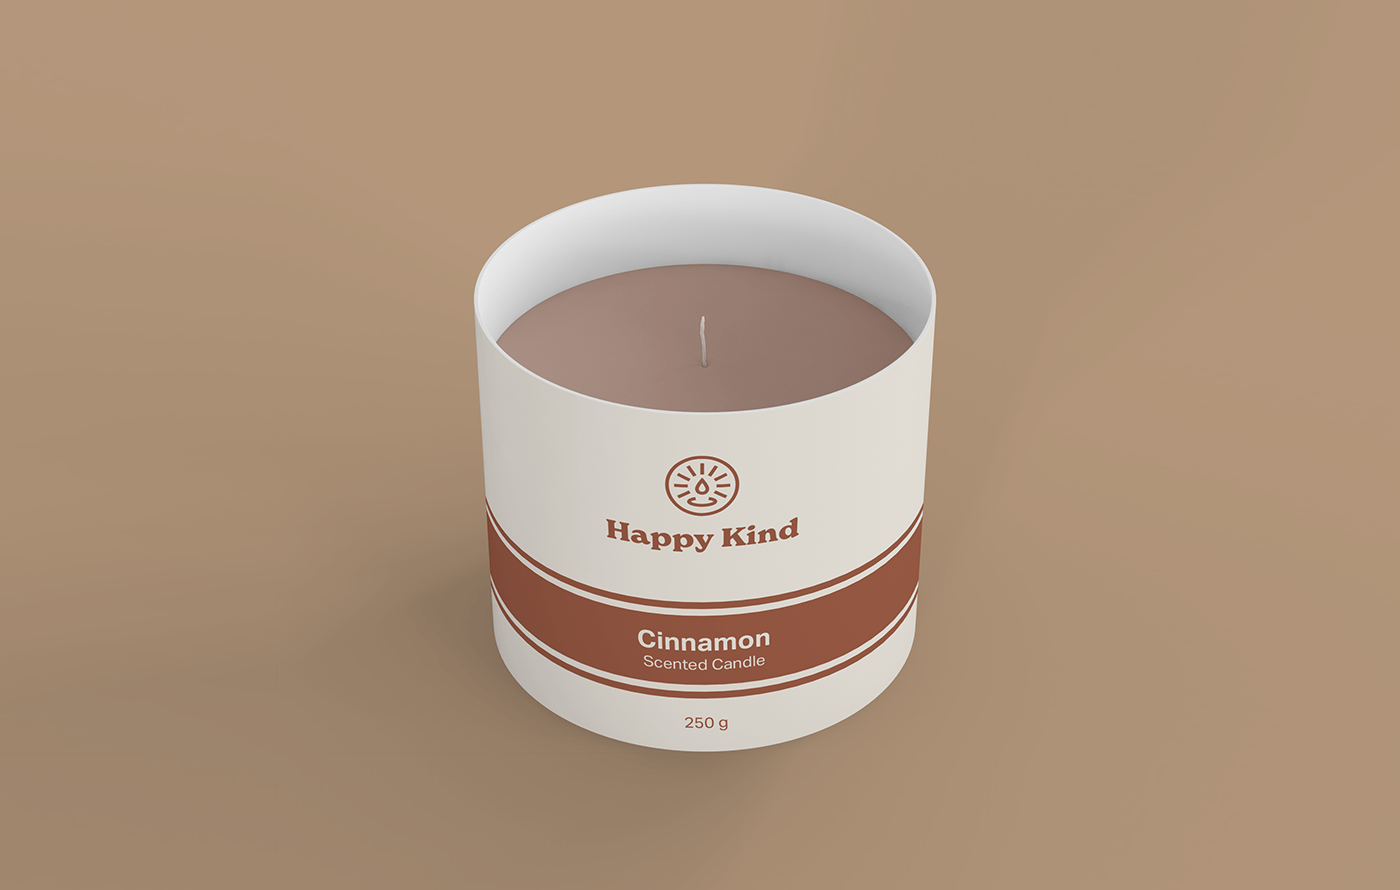 Aromatherapy branding  candle cozy vibe earthy colors logo organic scented candles self care Wellness